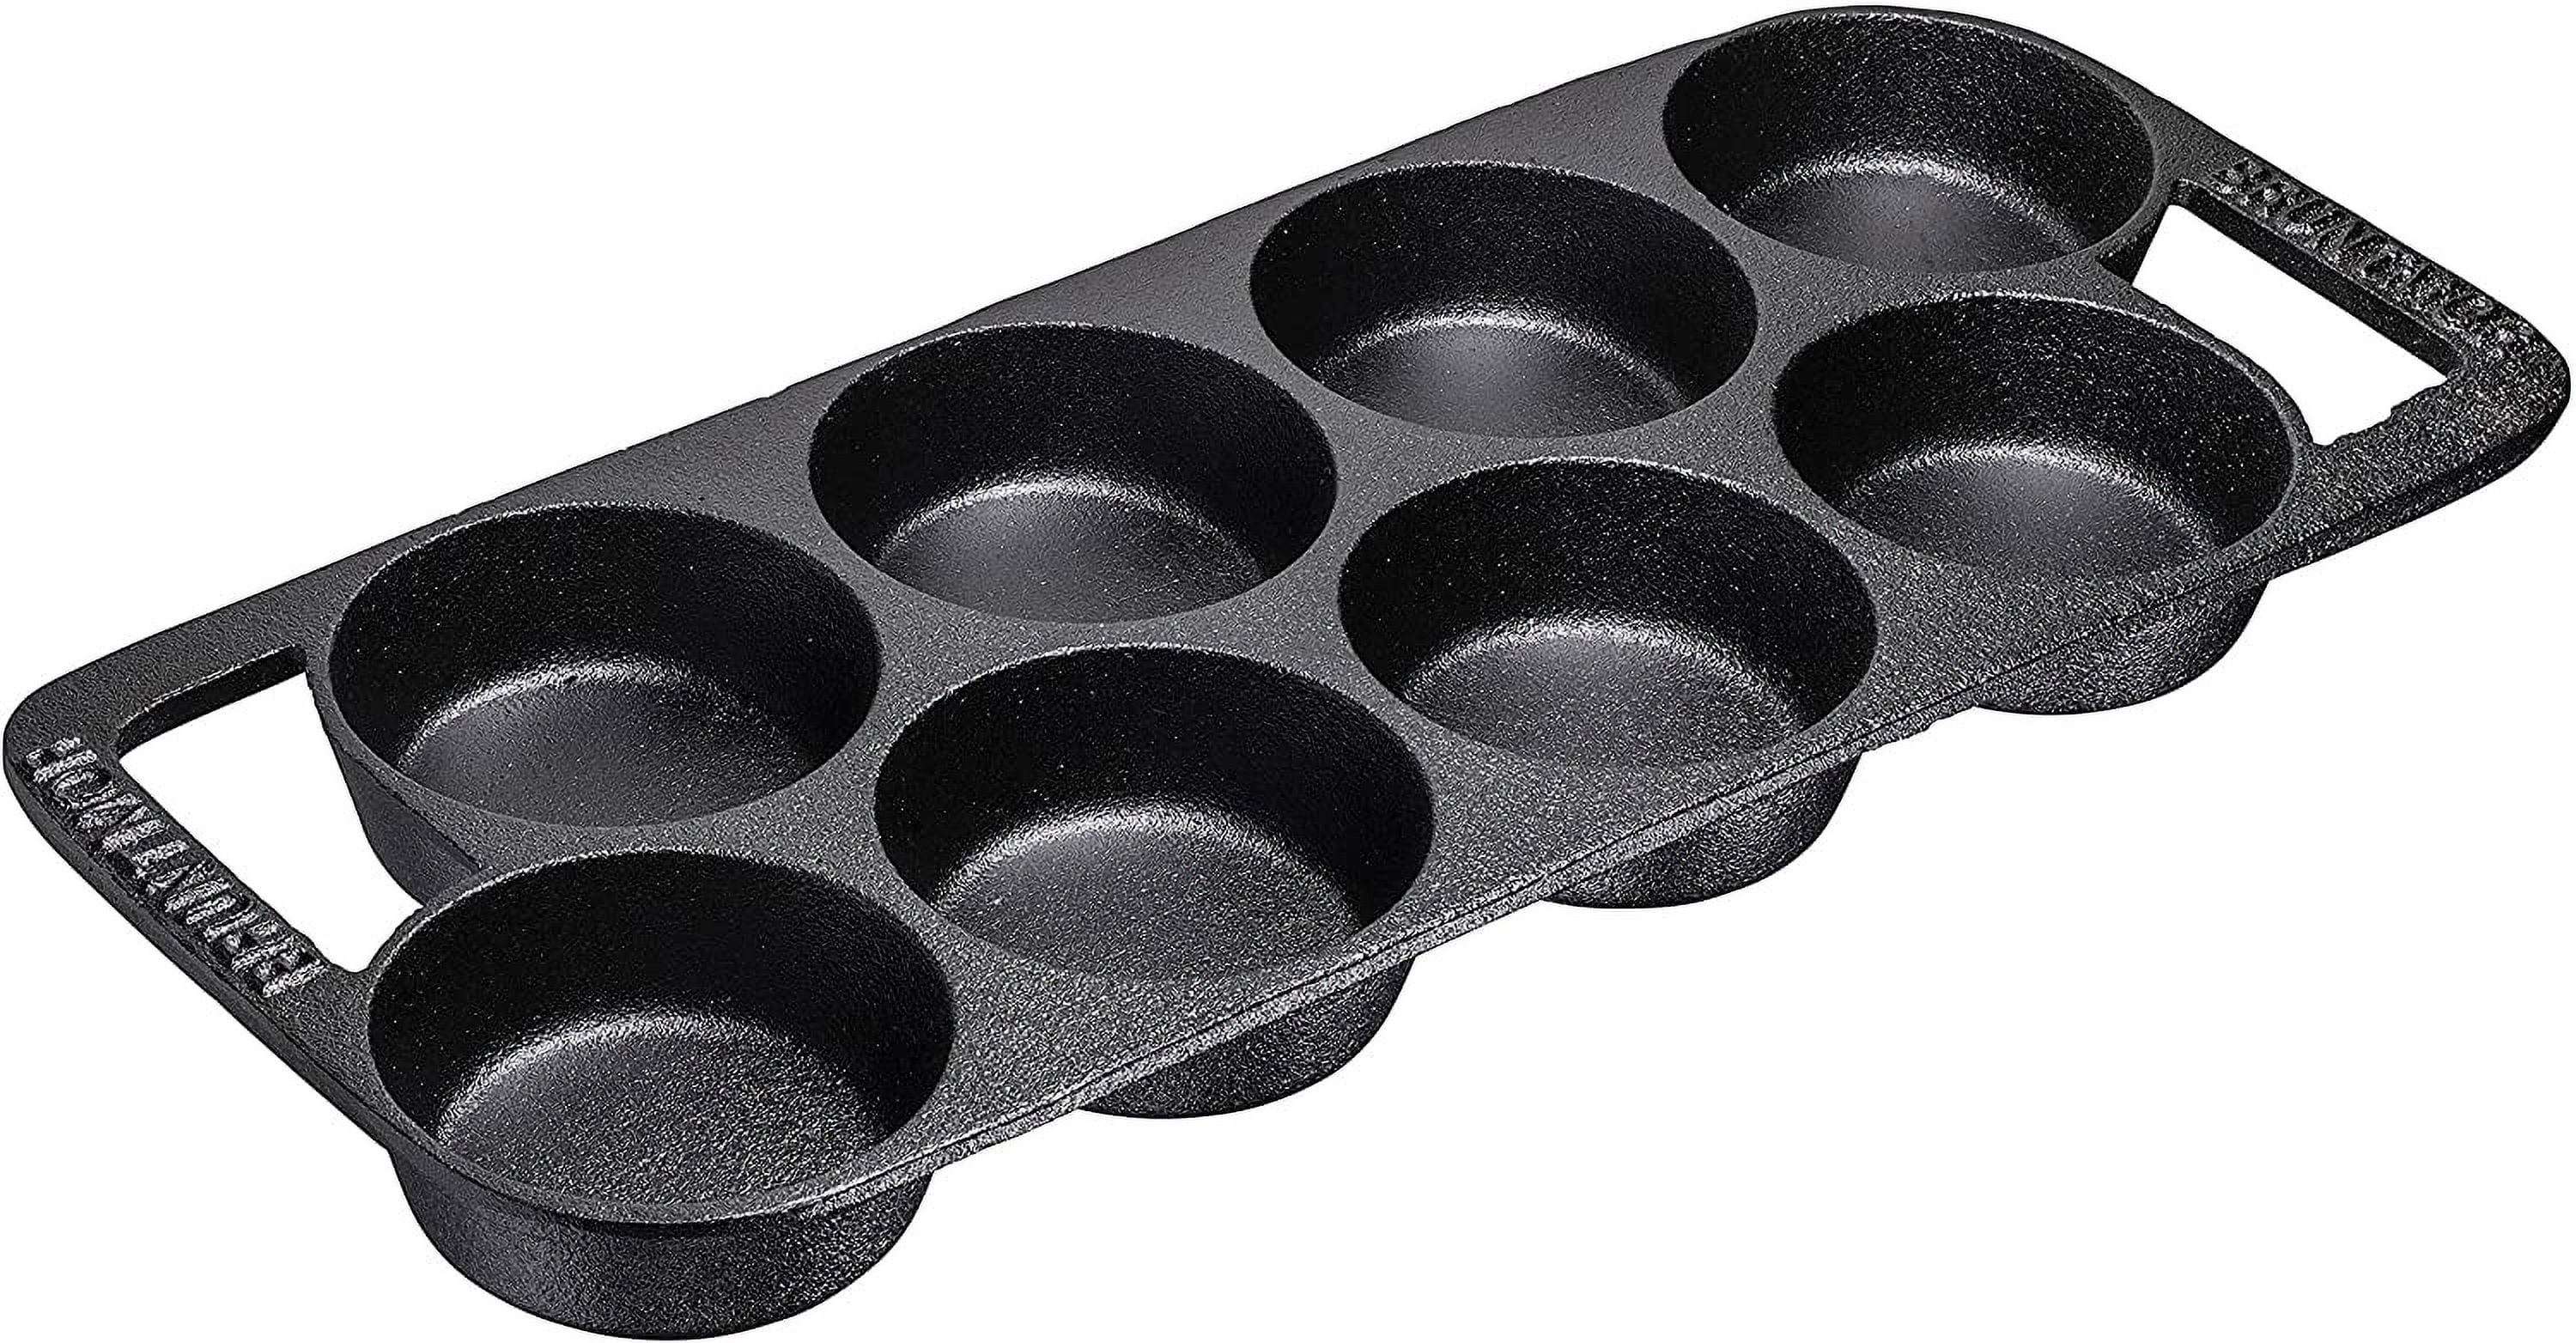 Bruntmor 11 Cup Muffin Pan - Premium Cast Iron Non-Stick Baking Tool, 9 H 5  L 2 W - Fry's Food Stores